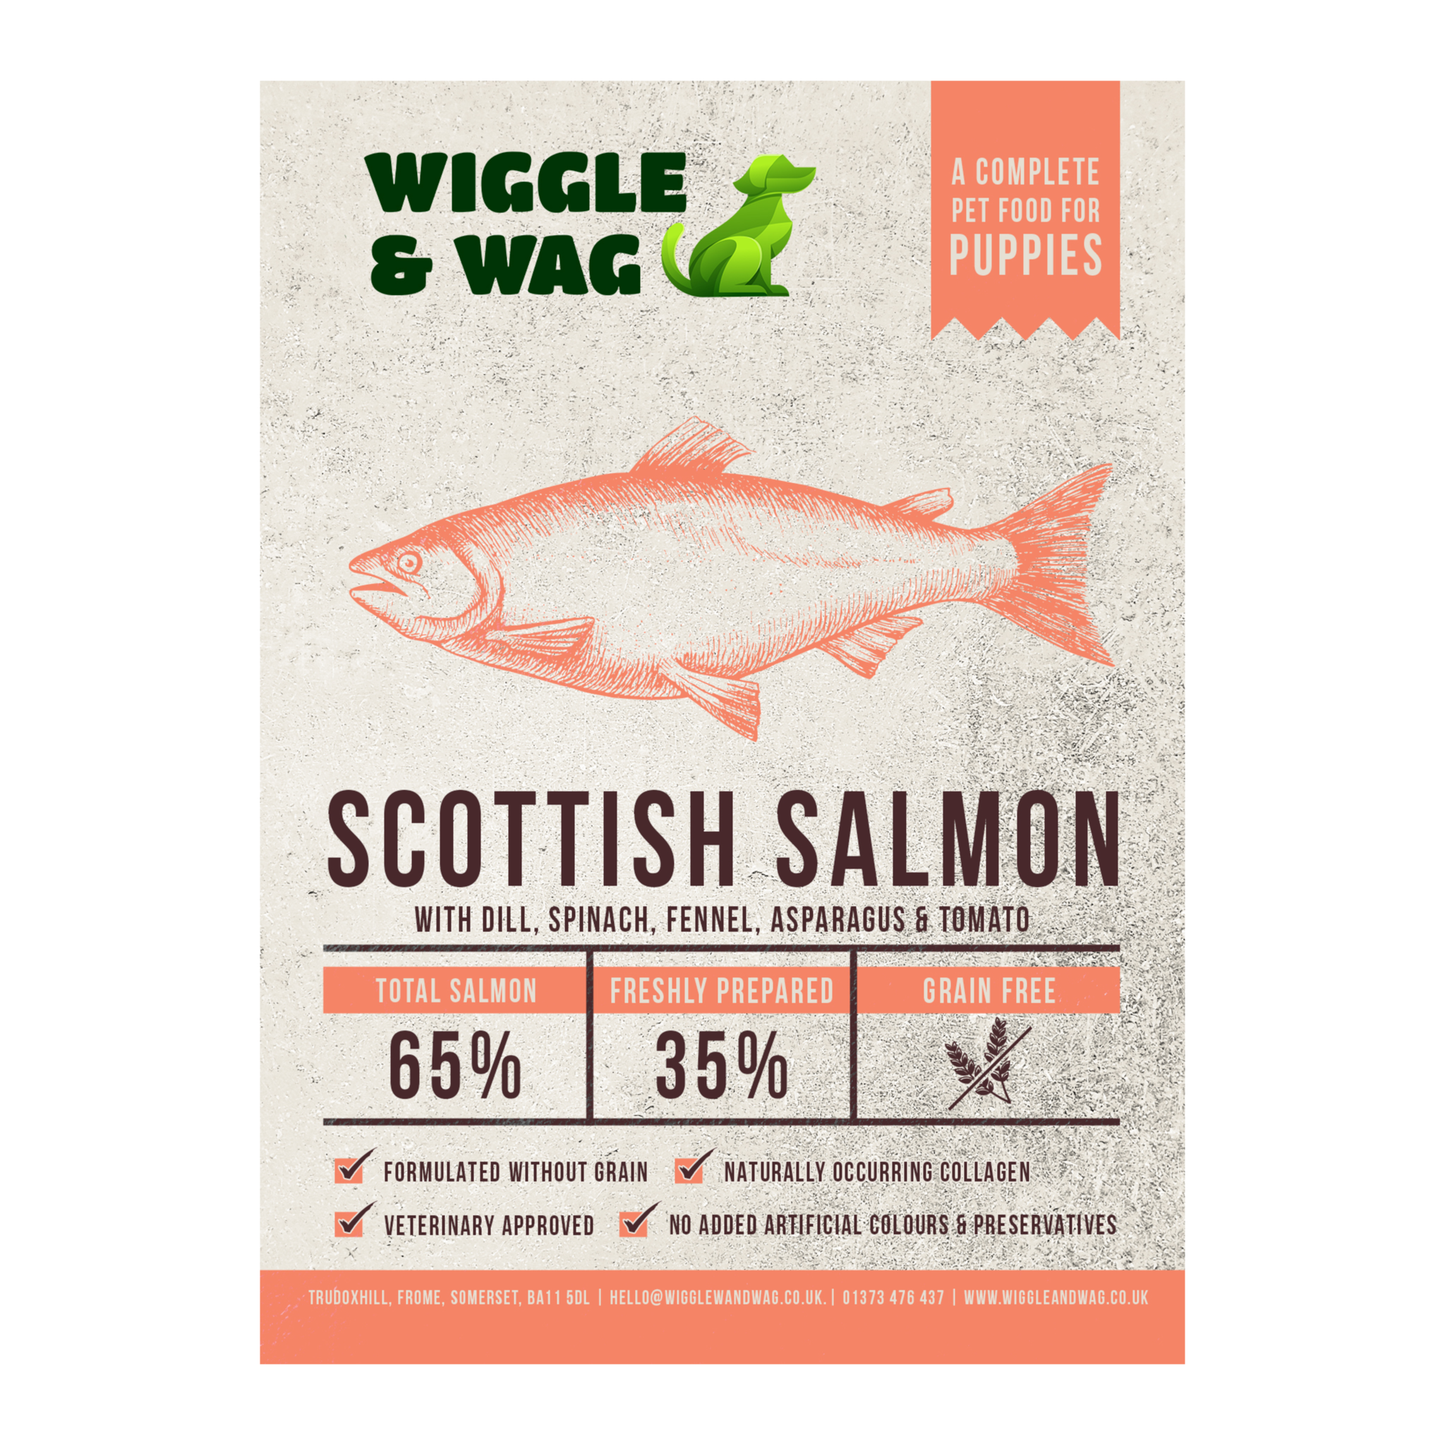 Grain Free Puppy Food - Scottish Salmon, Complete Food For Puppies